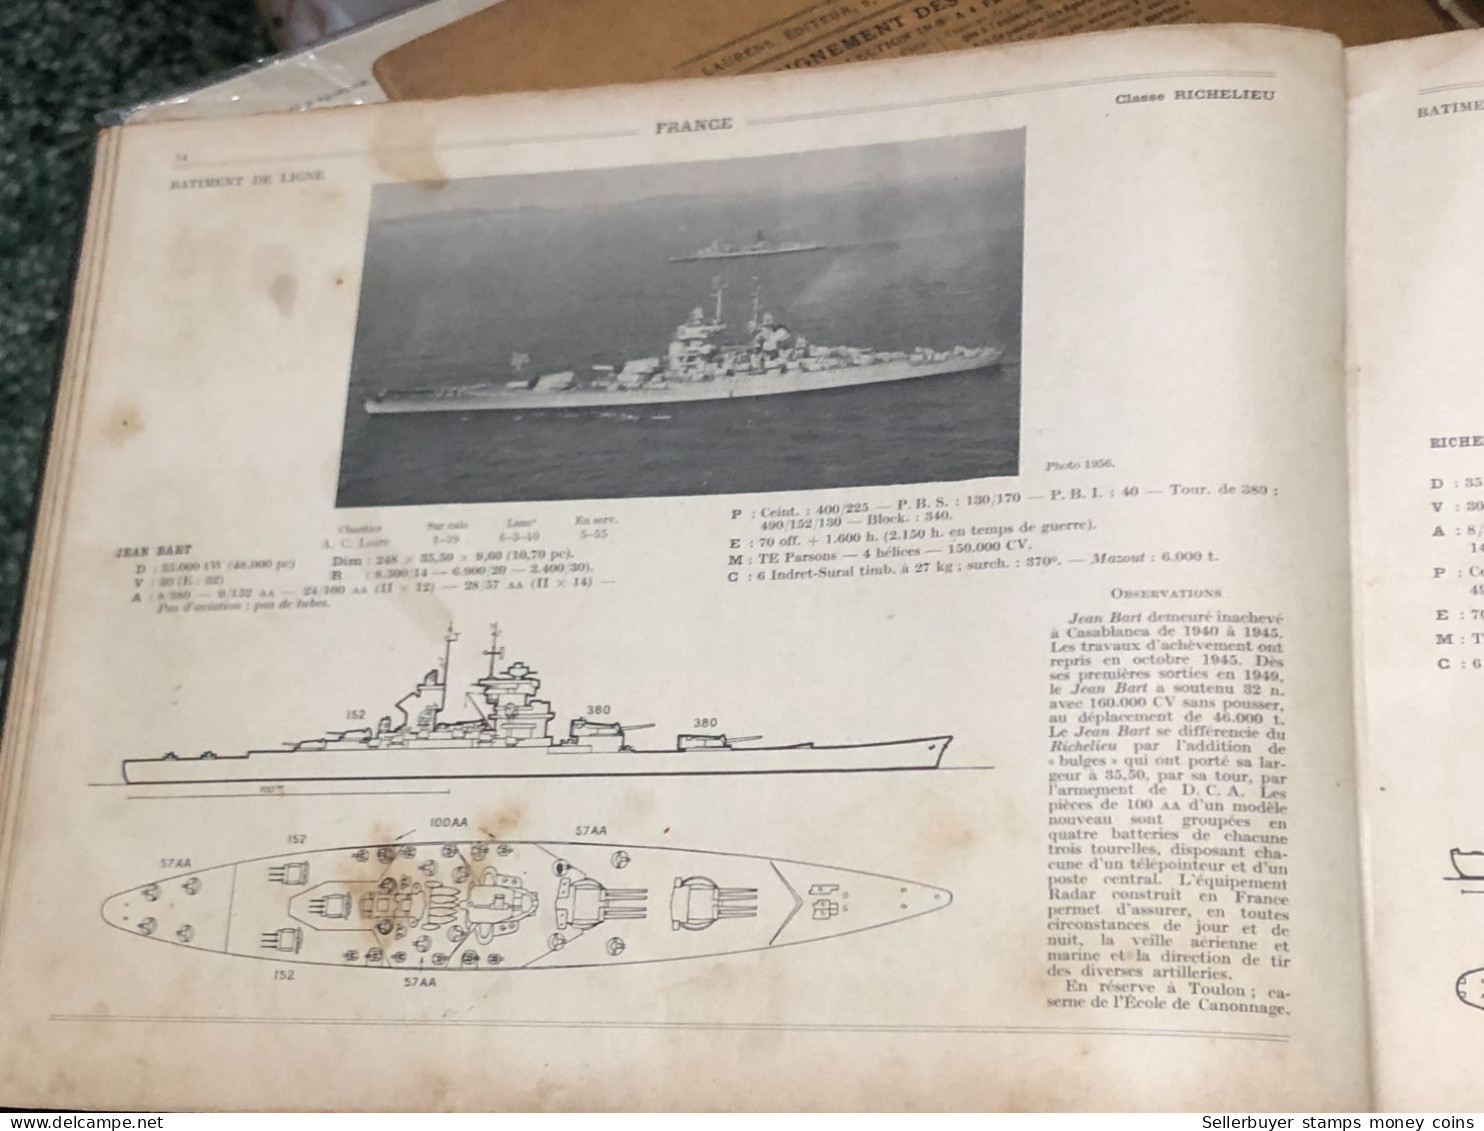 French books printed with images of warships, engines and submarines from 1897 and 1960 were bought by Vietnamese reader